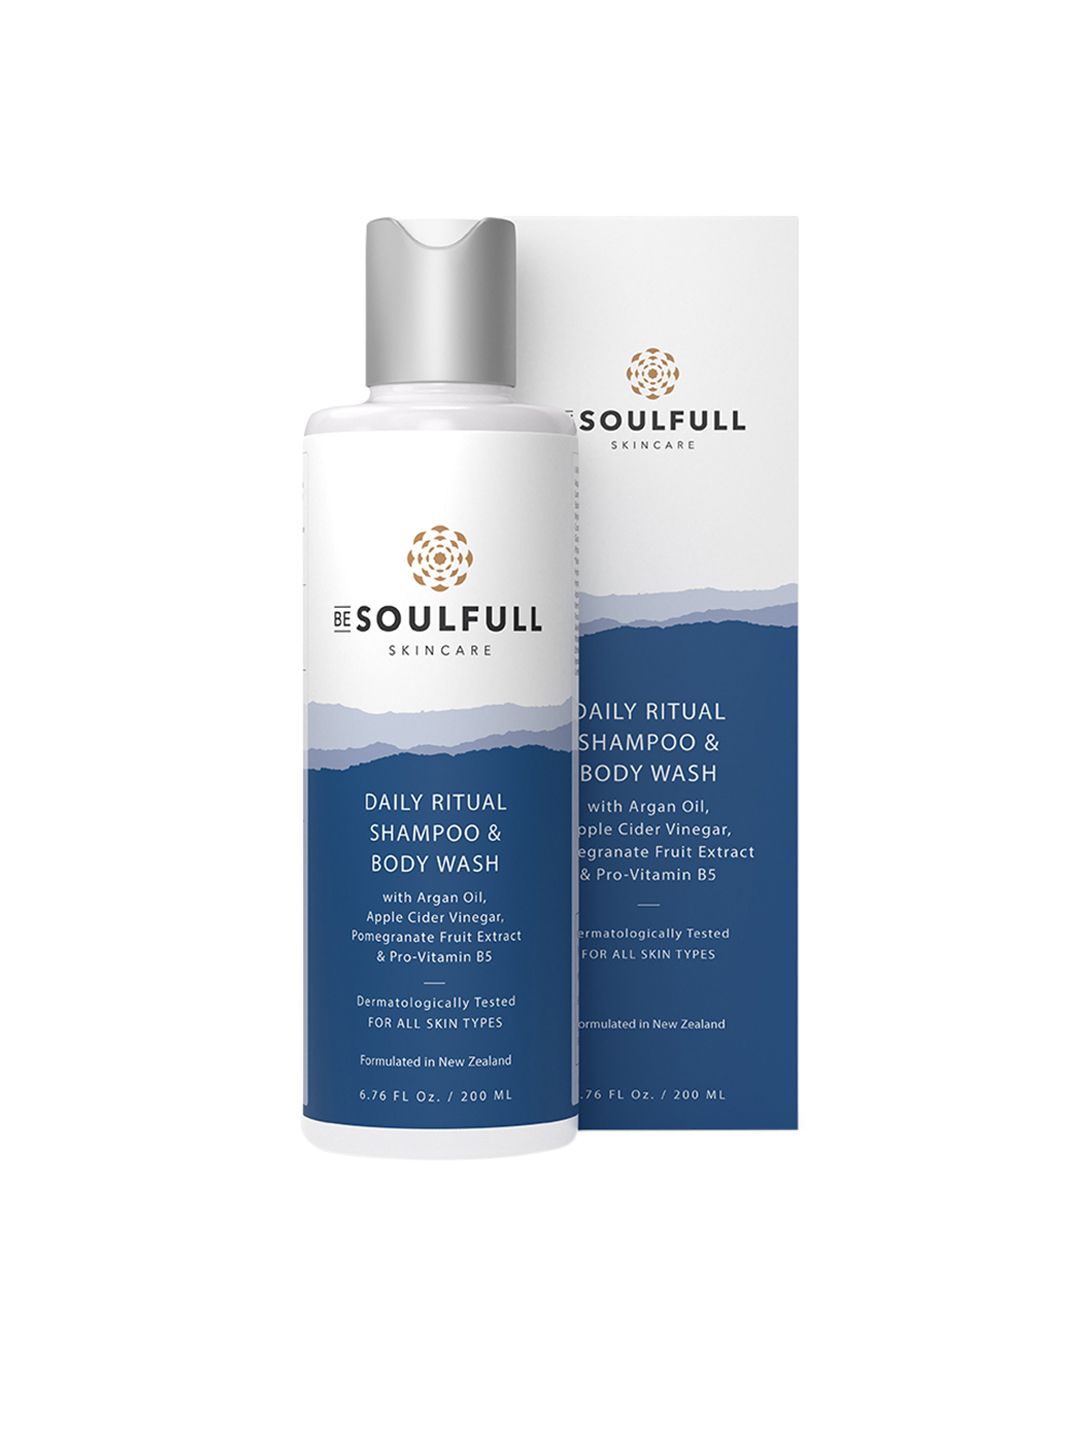 BE SOULFULL Daily Ritual 2-In-1 Shampoo & Body Wash with Argan Oil 200 ml Price in India